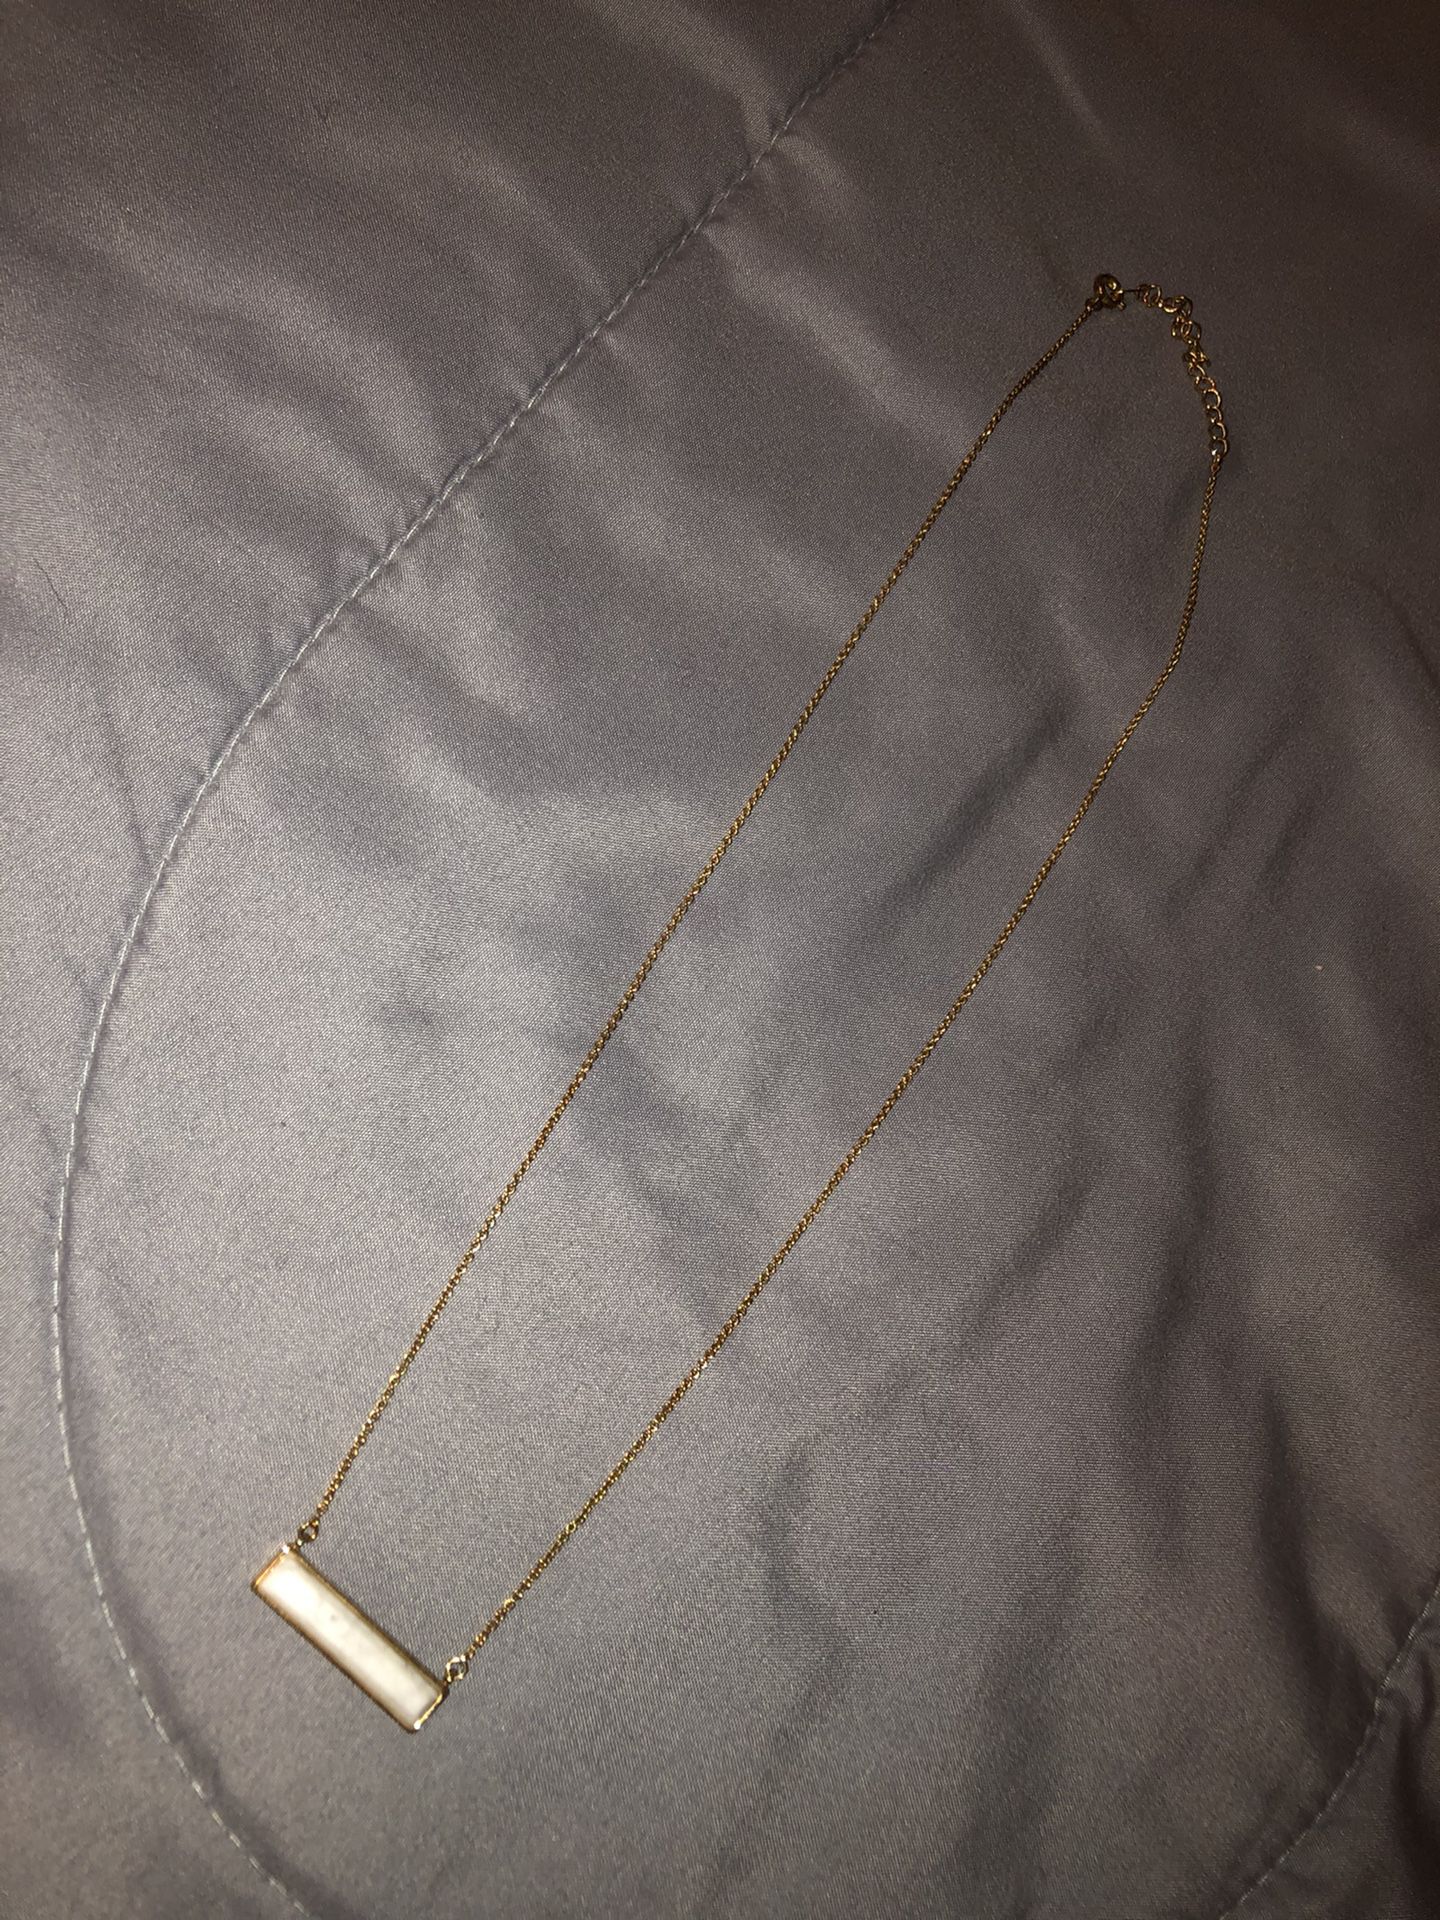 Target Necklace